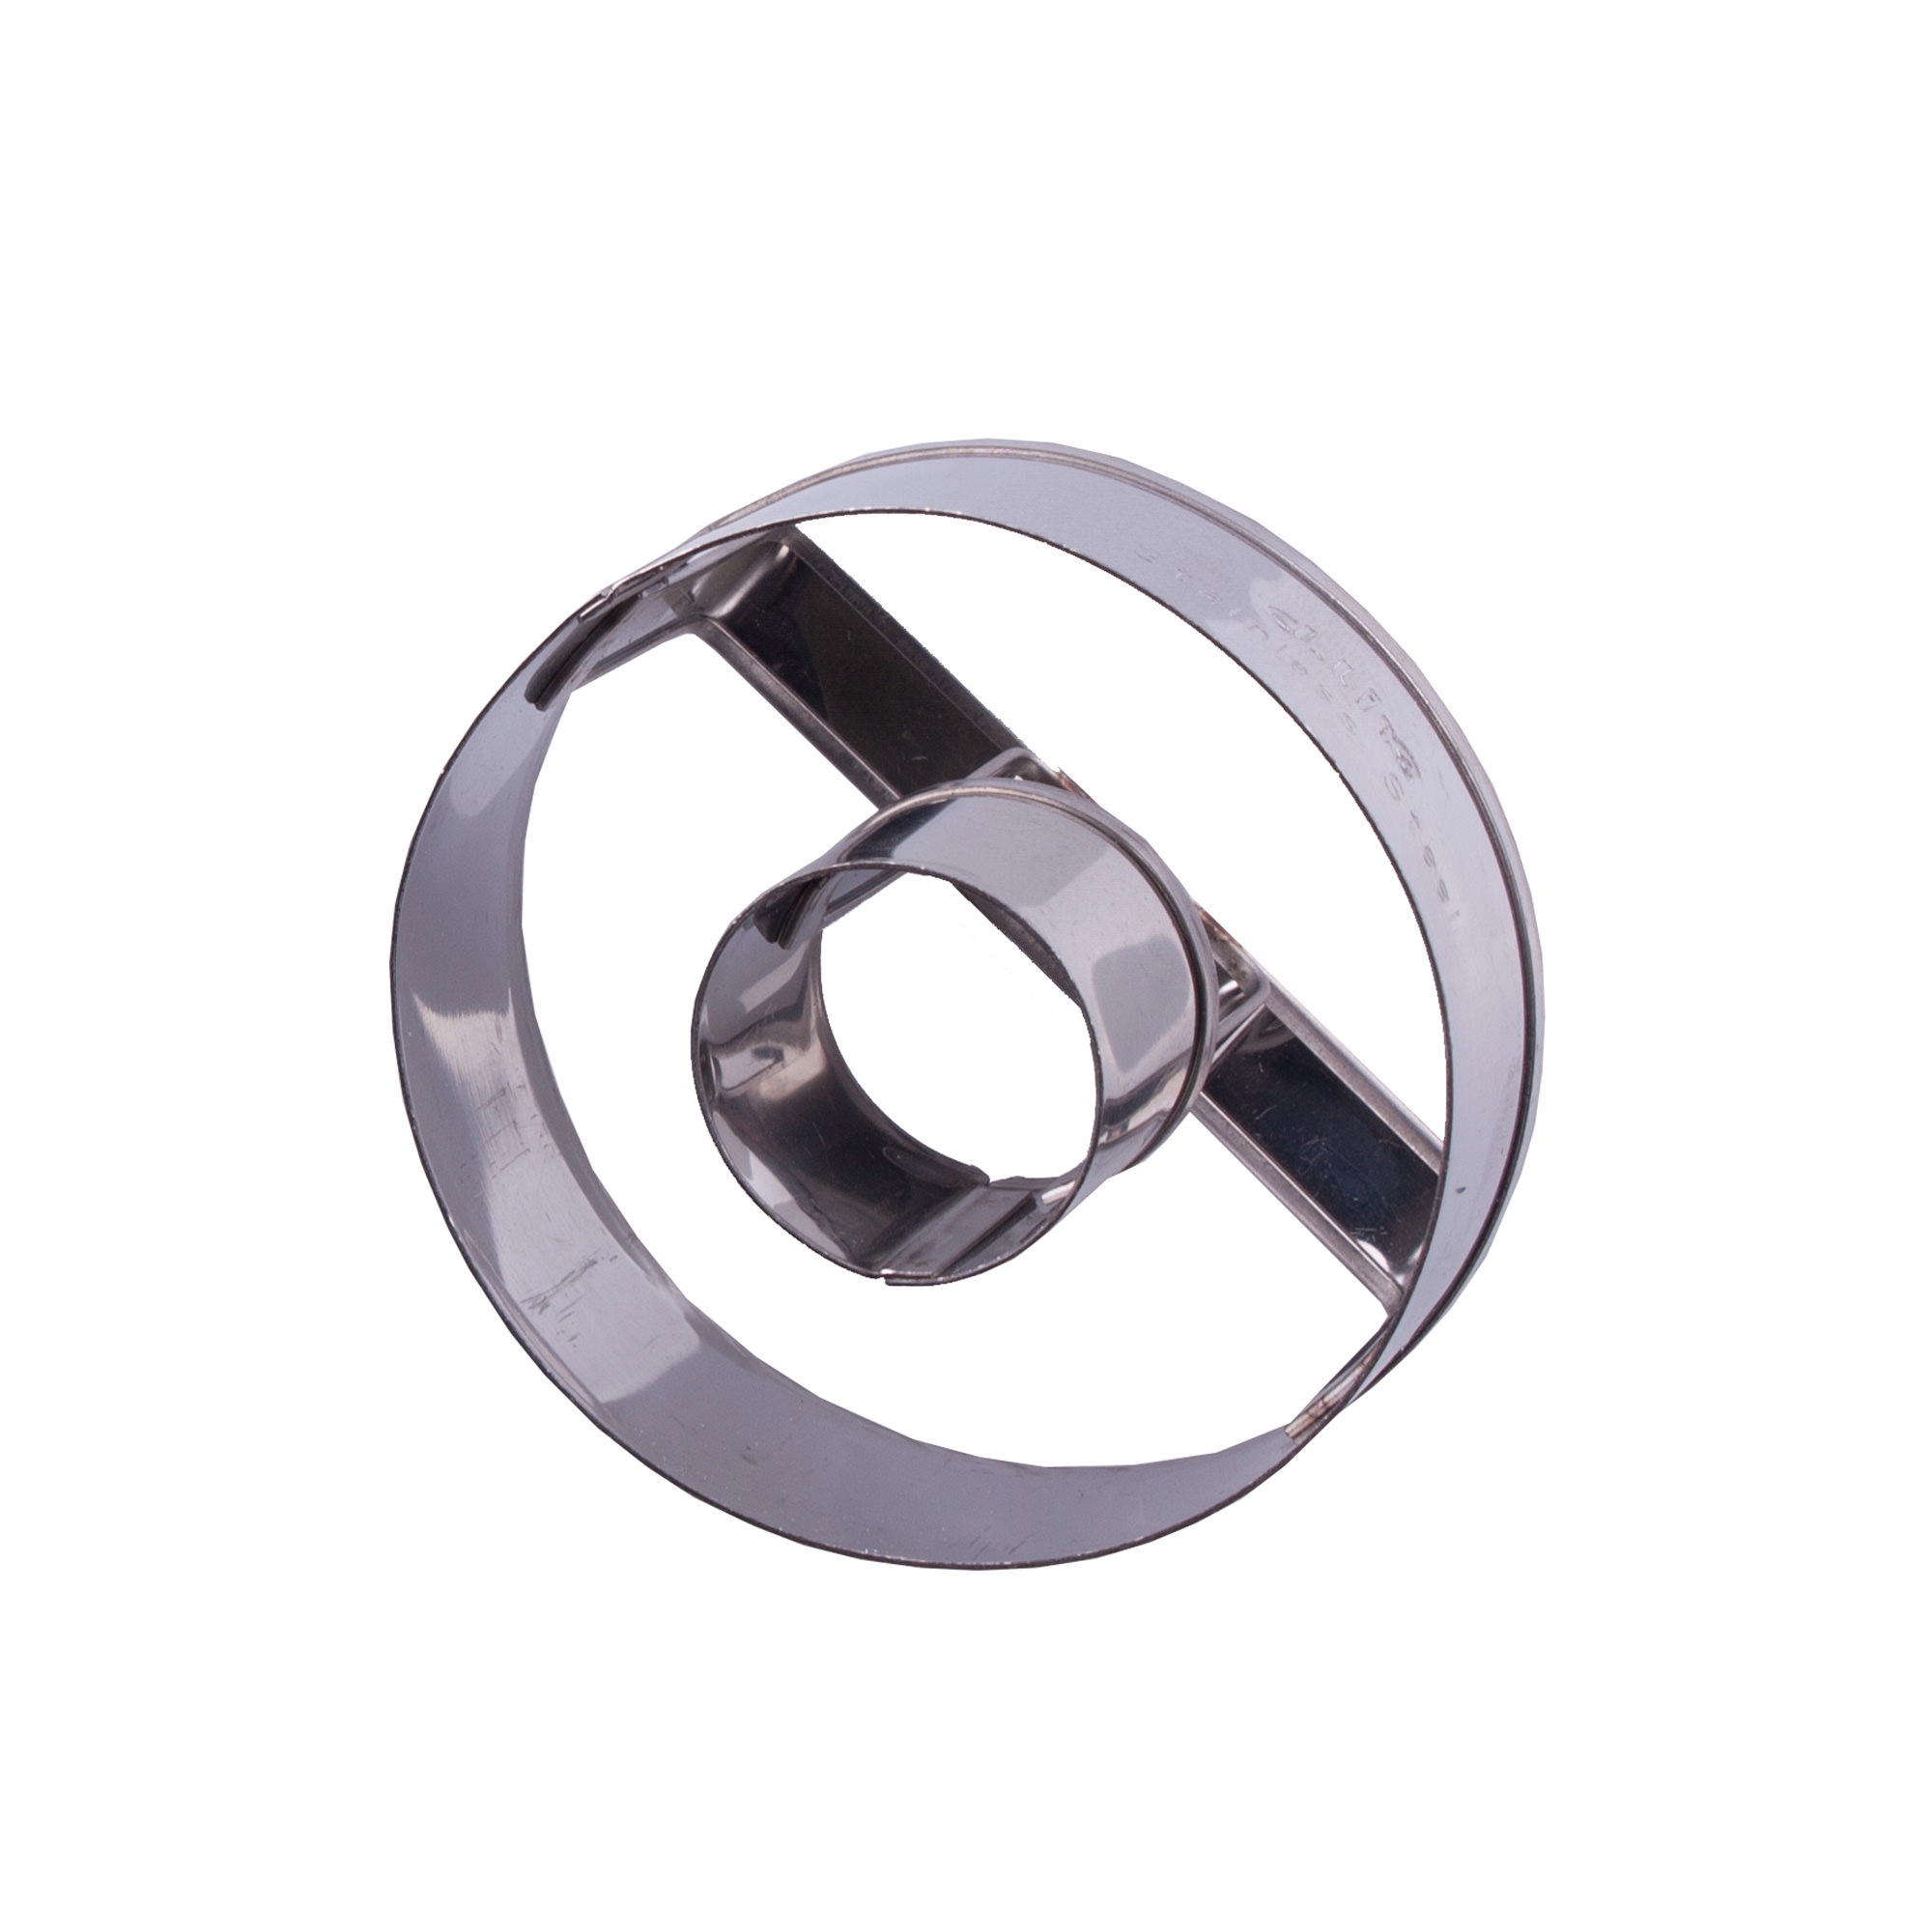 Appetito Doughnut Cutter Stainless Steel 7.5cm Image 1